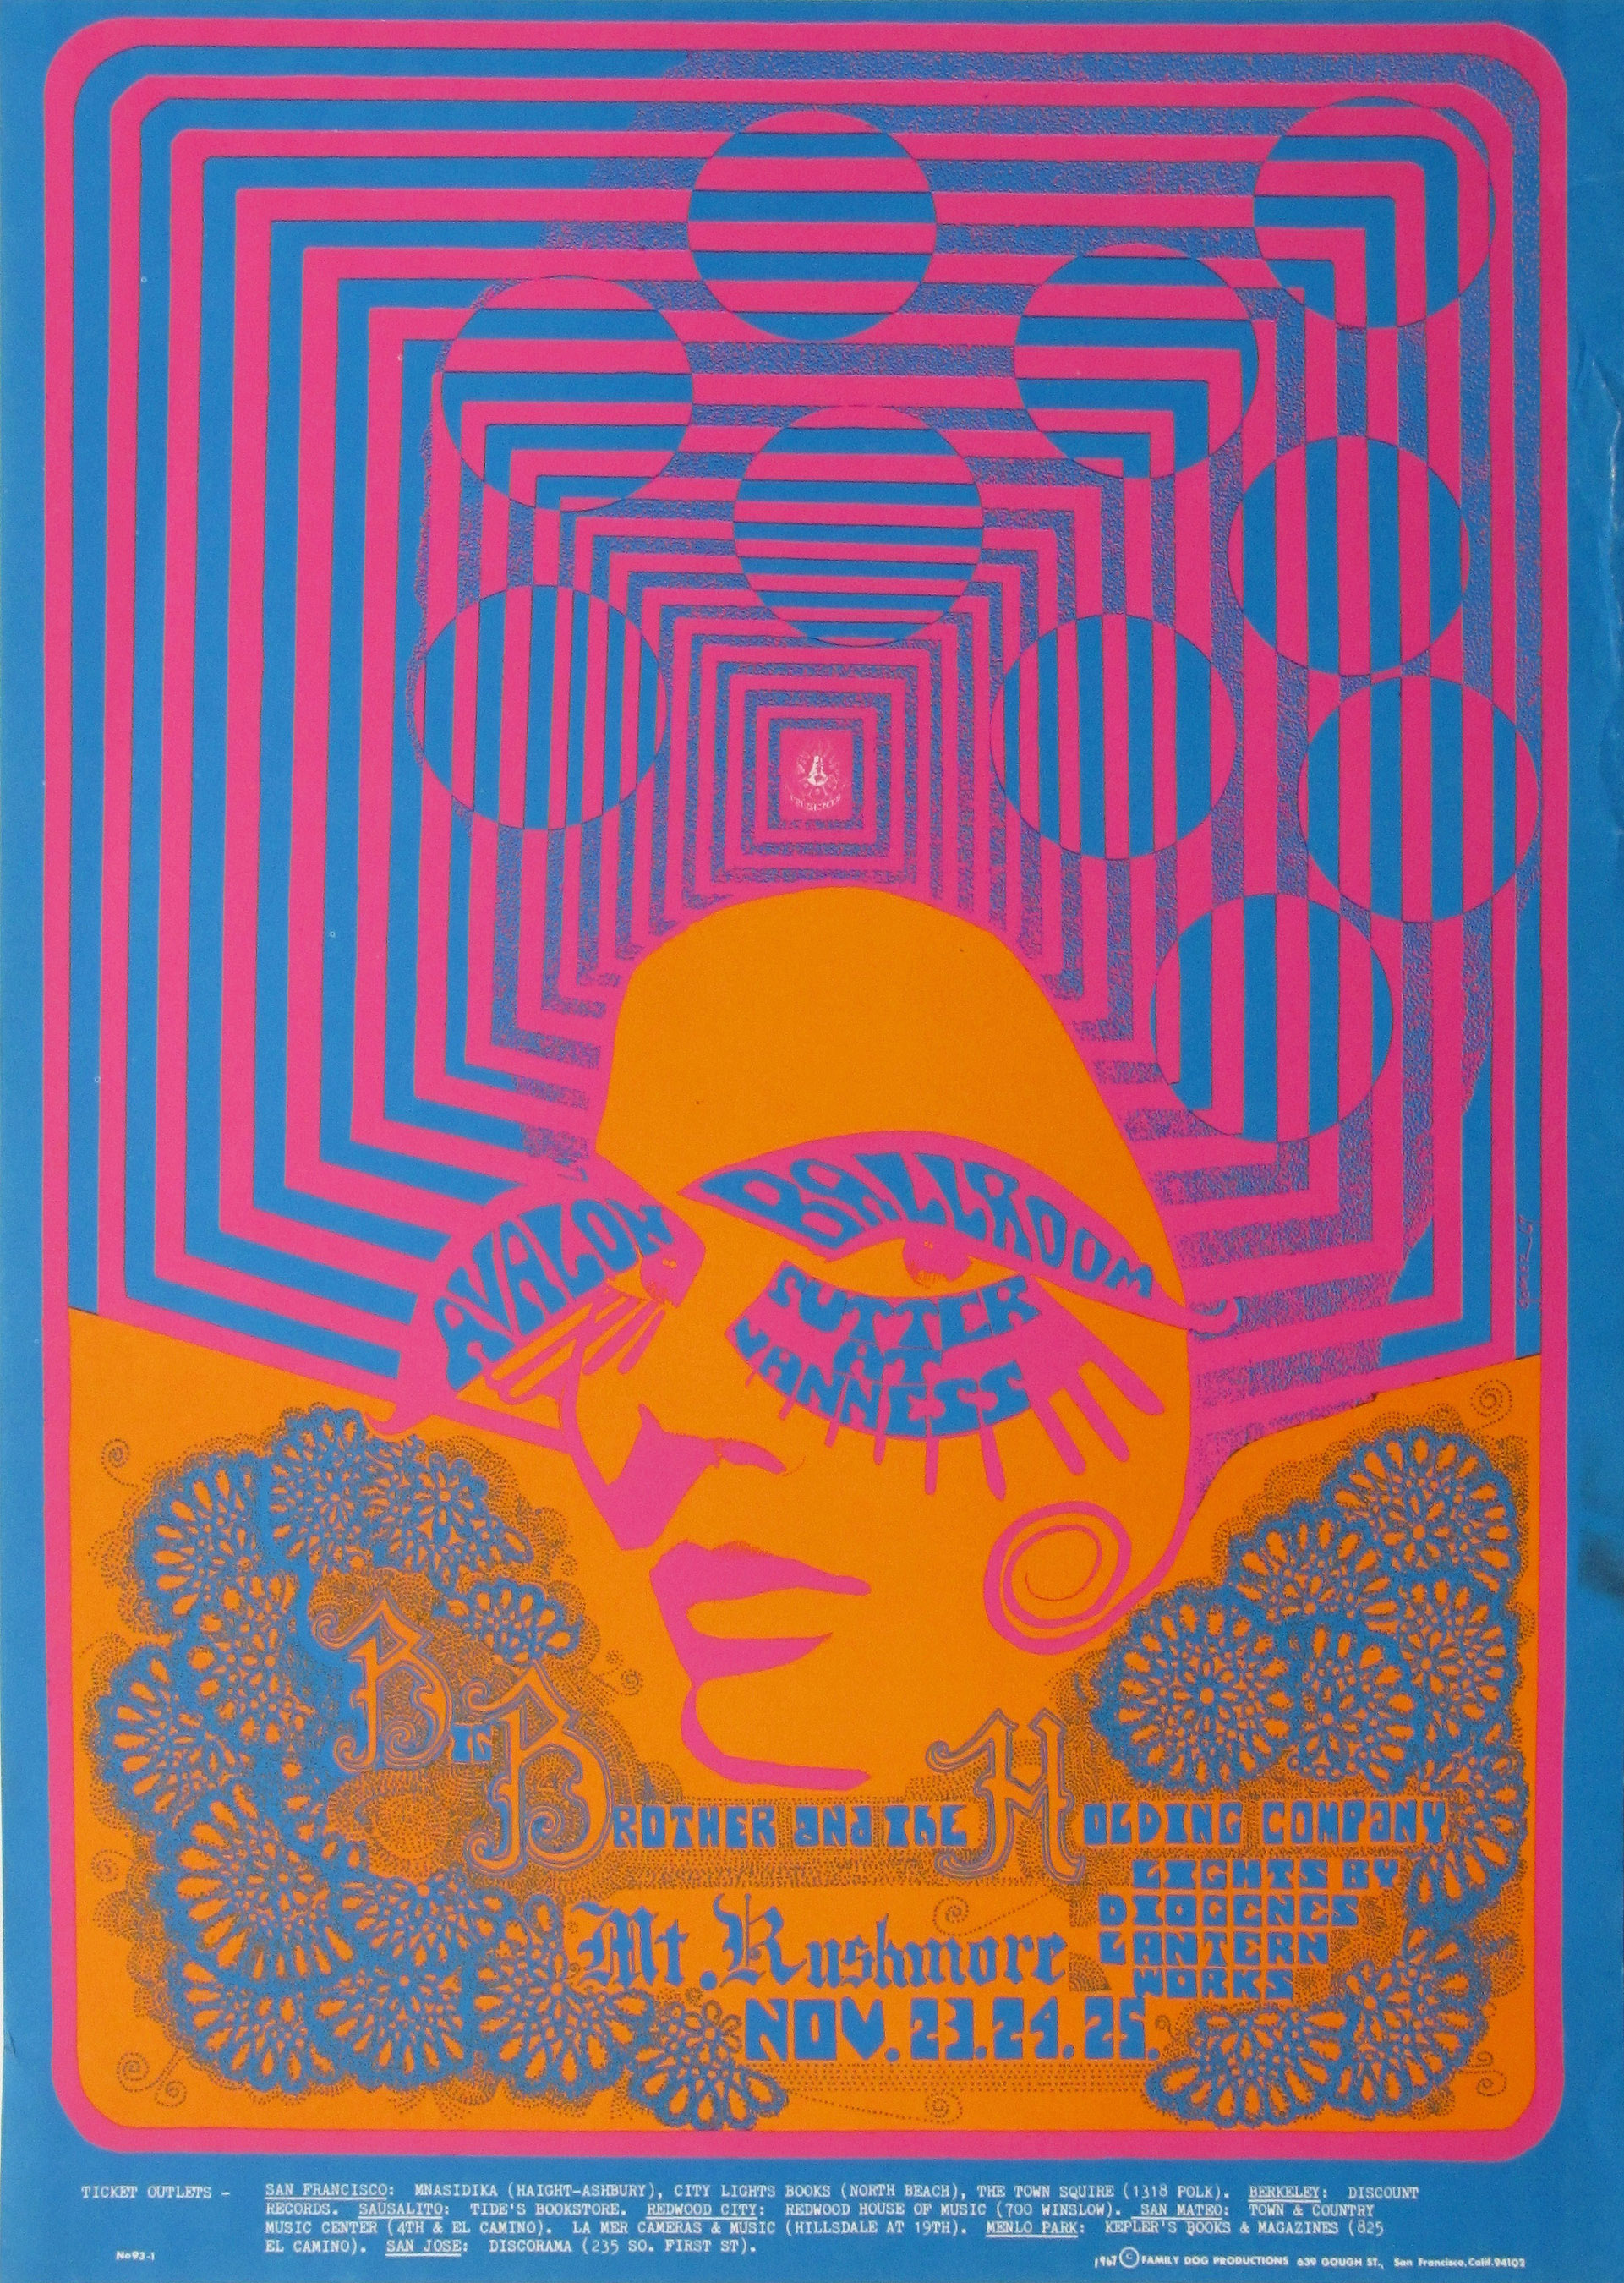 Big Brother And The Holding Company and Mt. Rushmore Concert Poster